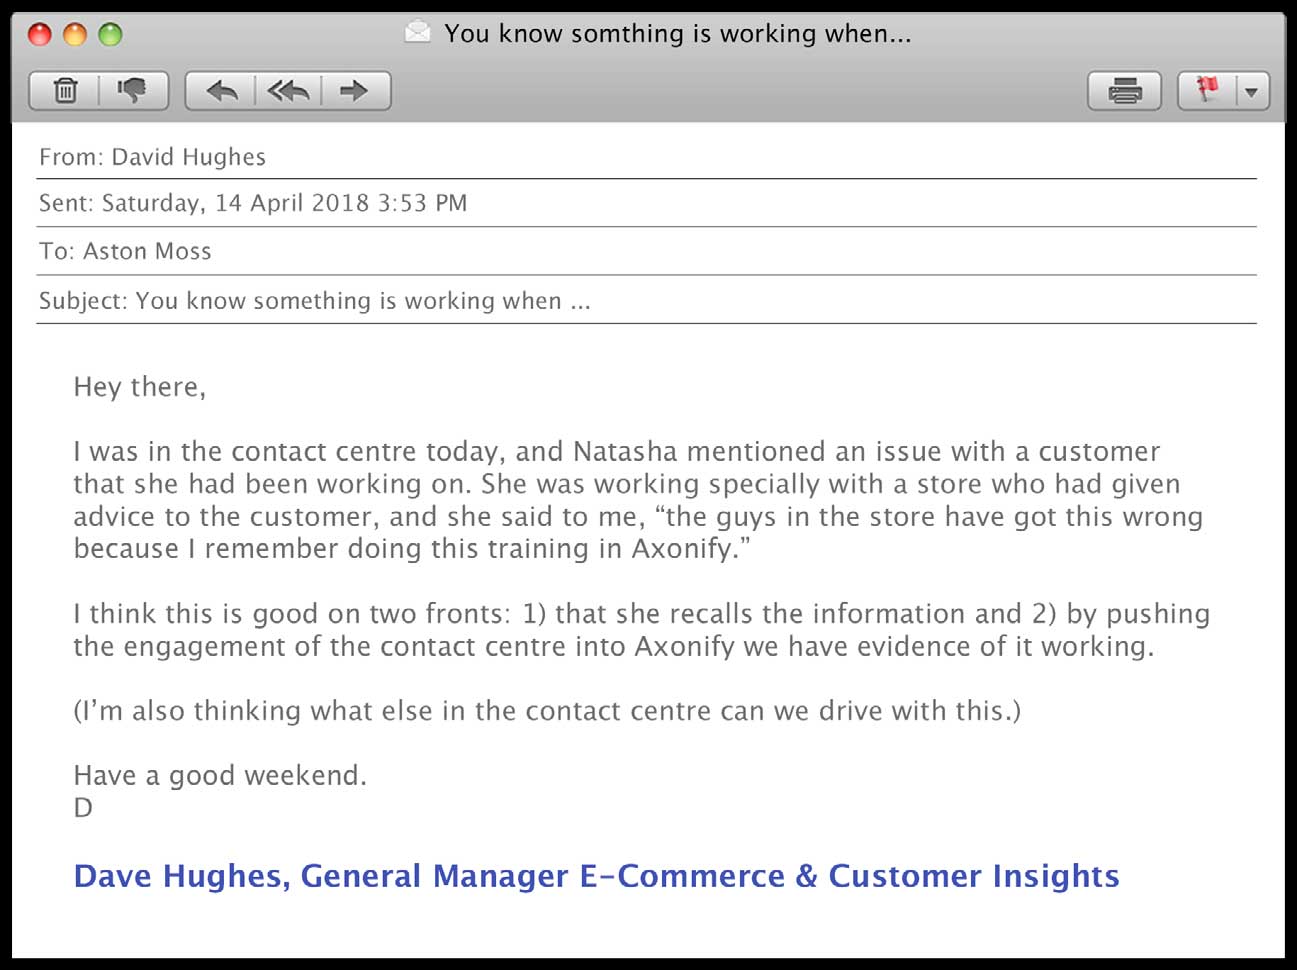 Screenshot of an email from David Hughes, General Manager of e-Commerce & Customer Insights, to Aston Moss, with an example of an associate recalling Axonify training